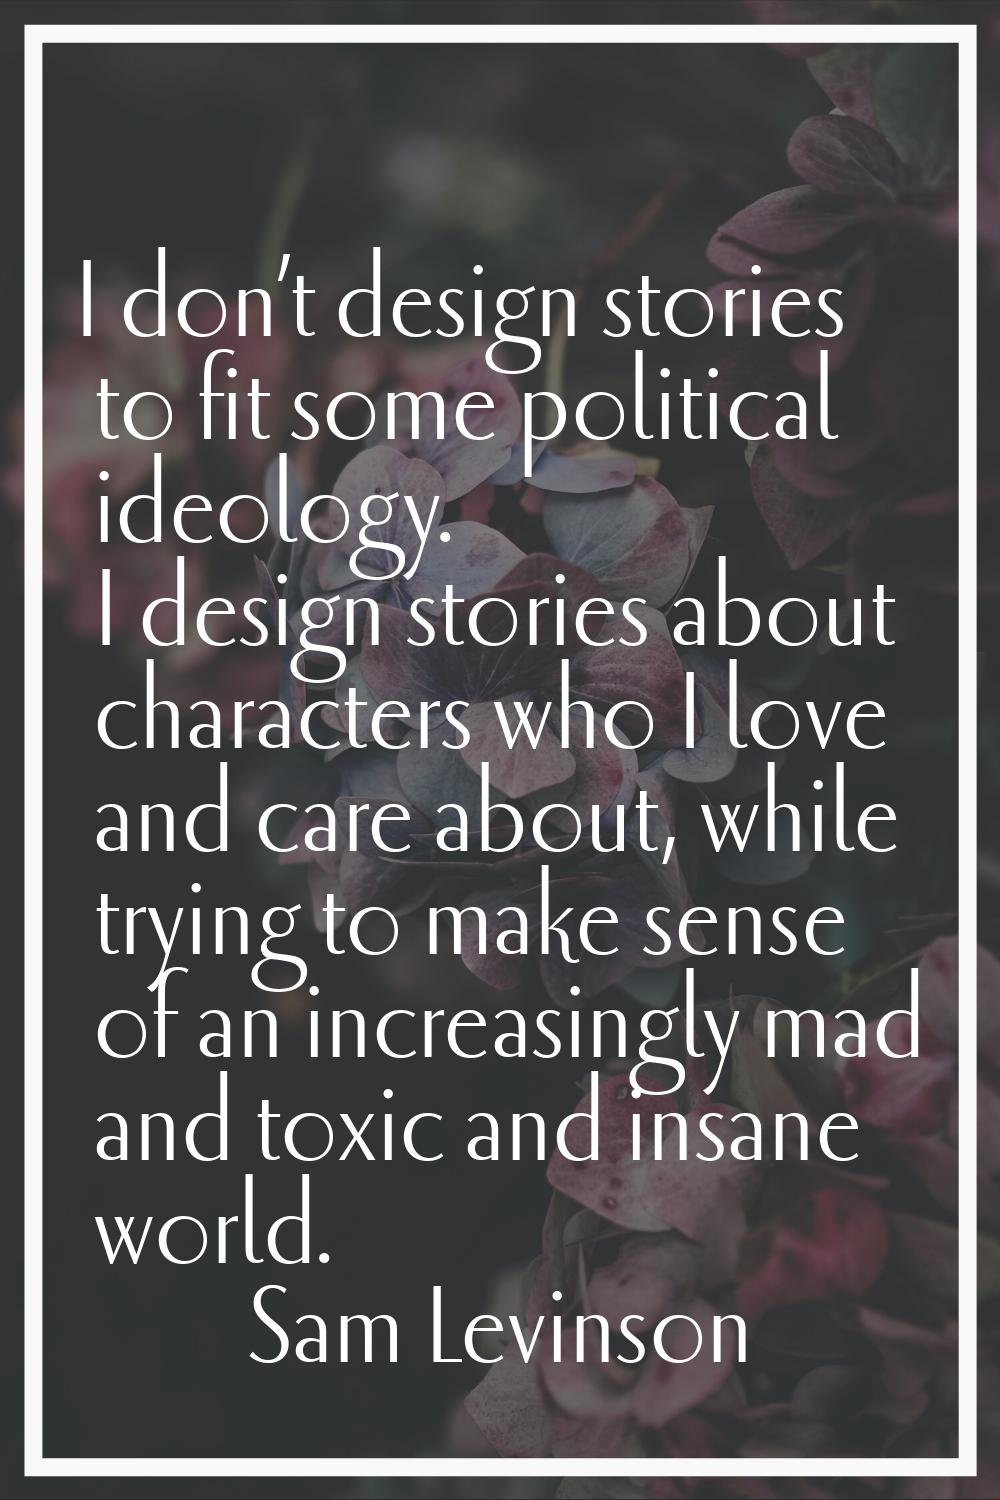 I don’t design stories to fit some political ideology. I design stories about characters who I love